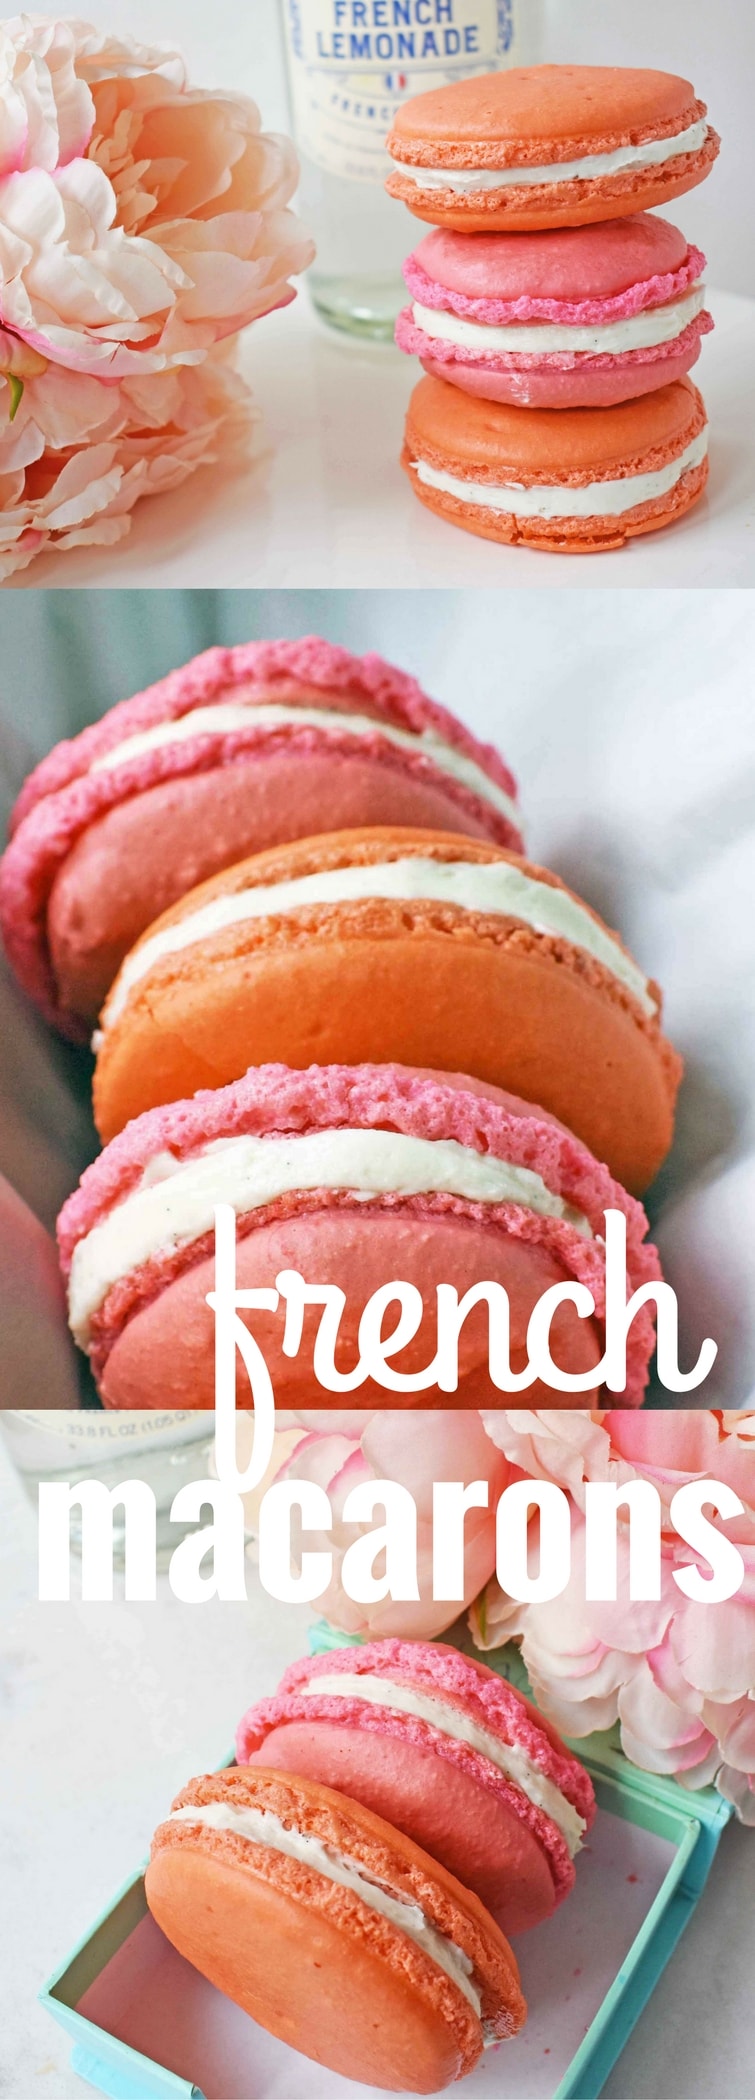 How to make home French Macarons at home. Step by step instructions and tips and tricks for making these popular french cookies. Naturally gluten-free cookies. www.modernhoney.com